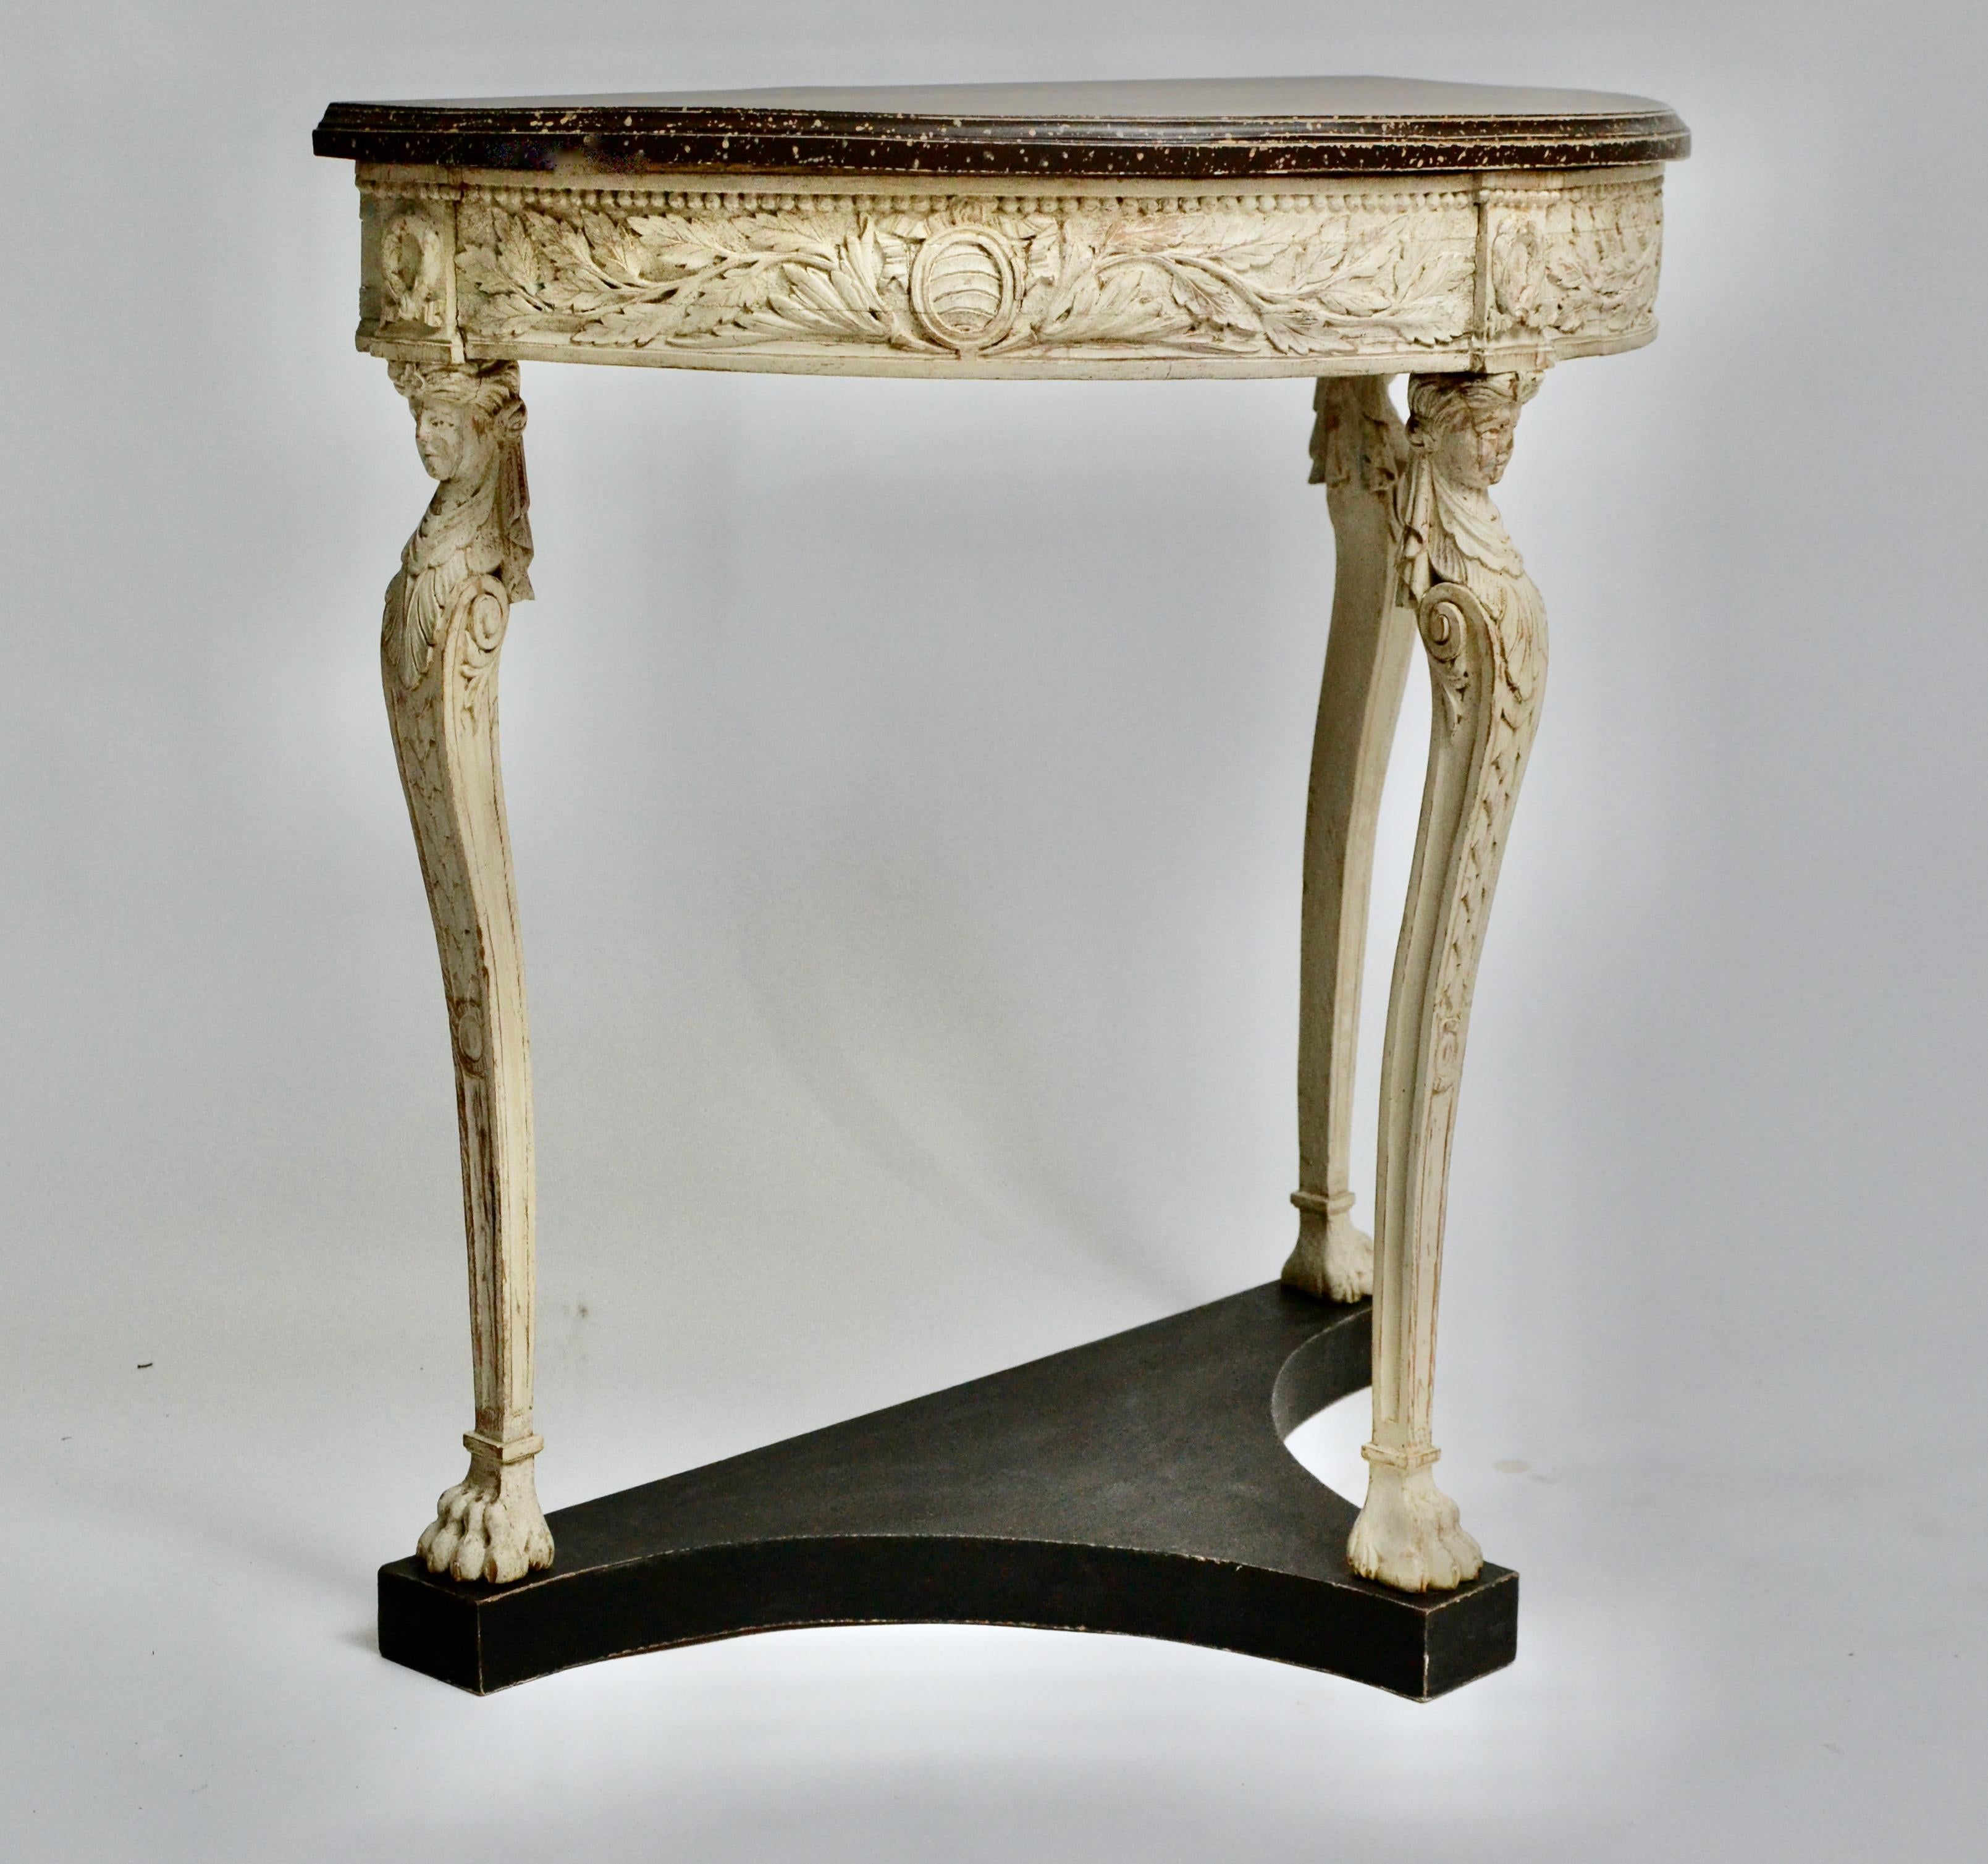 Wood Gustavian Console Table with a Faux Porphyry Painted Top